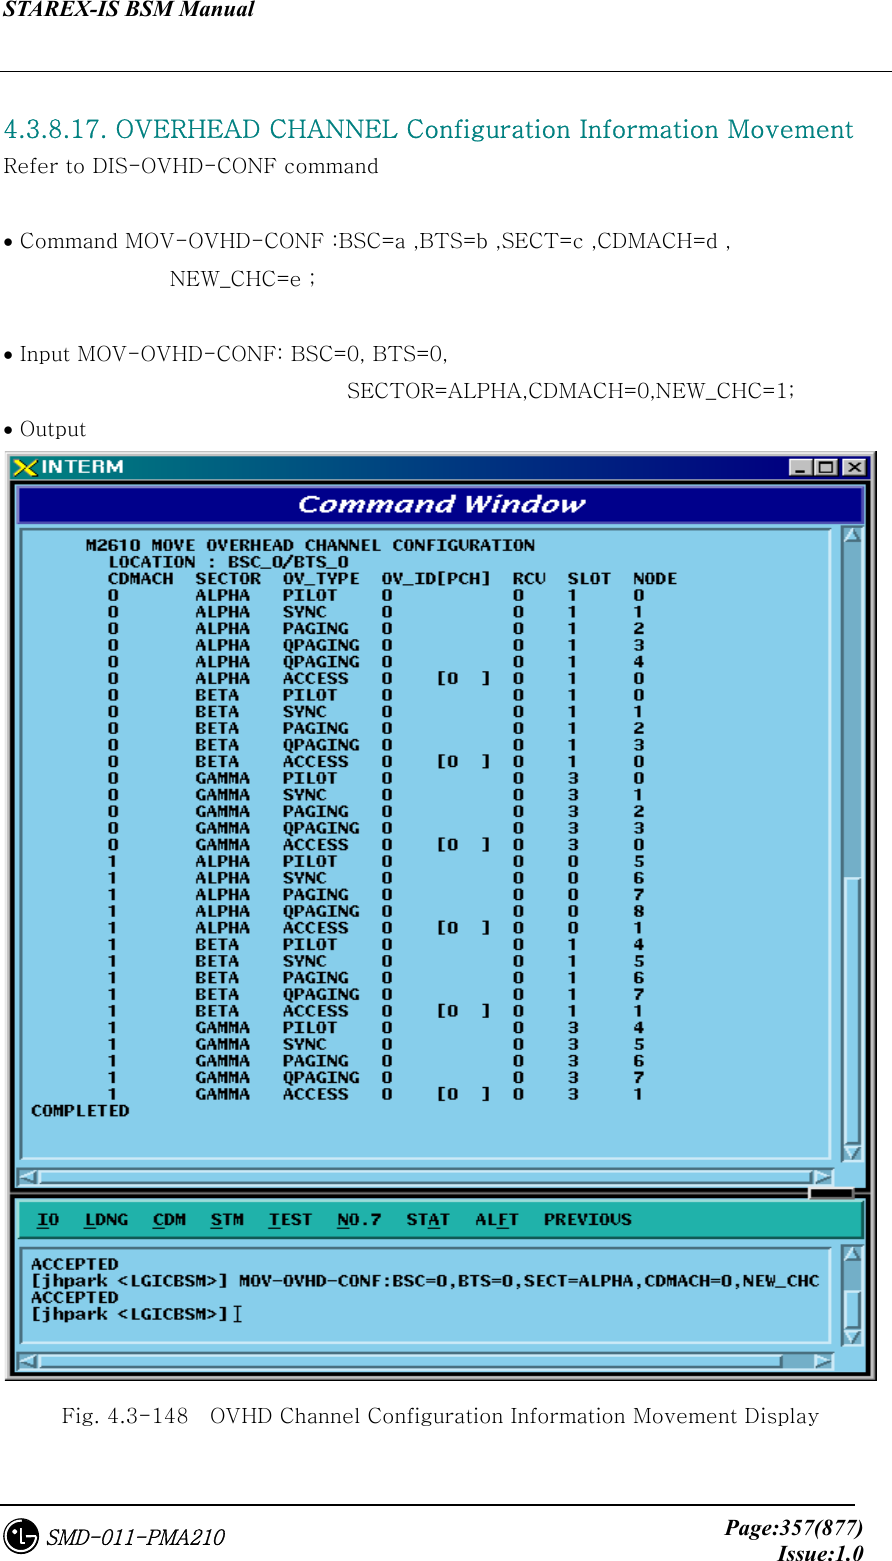 STAREX-IS BSM Manual     Page:357(877)Issue:1.0SMD-011-PMA210  4.3.8.17. OVERHEAD CHANNEL Configuration Information Movement Refer to DIS-OVHD-CONF command   • Command MOV-OVHD-CONF :BSC=a ,BTS=b ,SECT=c ,CDMACH=d , NEW_CHC=e ;  • Input MOV-OVHD-CONF: BSC=0, BTS=0,   SECTOR=ALPHA,CDMACH=0,NEW_CHC=1; • Output  Fig. 4.3-148    OVHD Channel Configuration Information Movement Display 